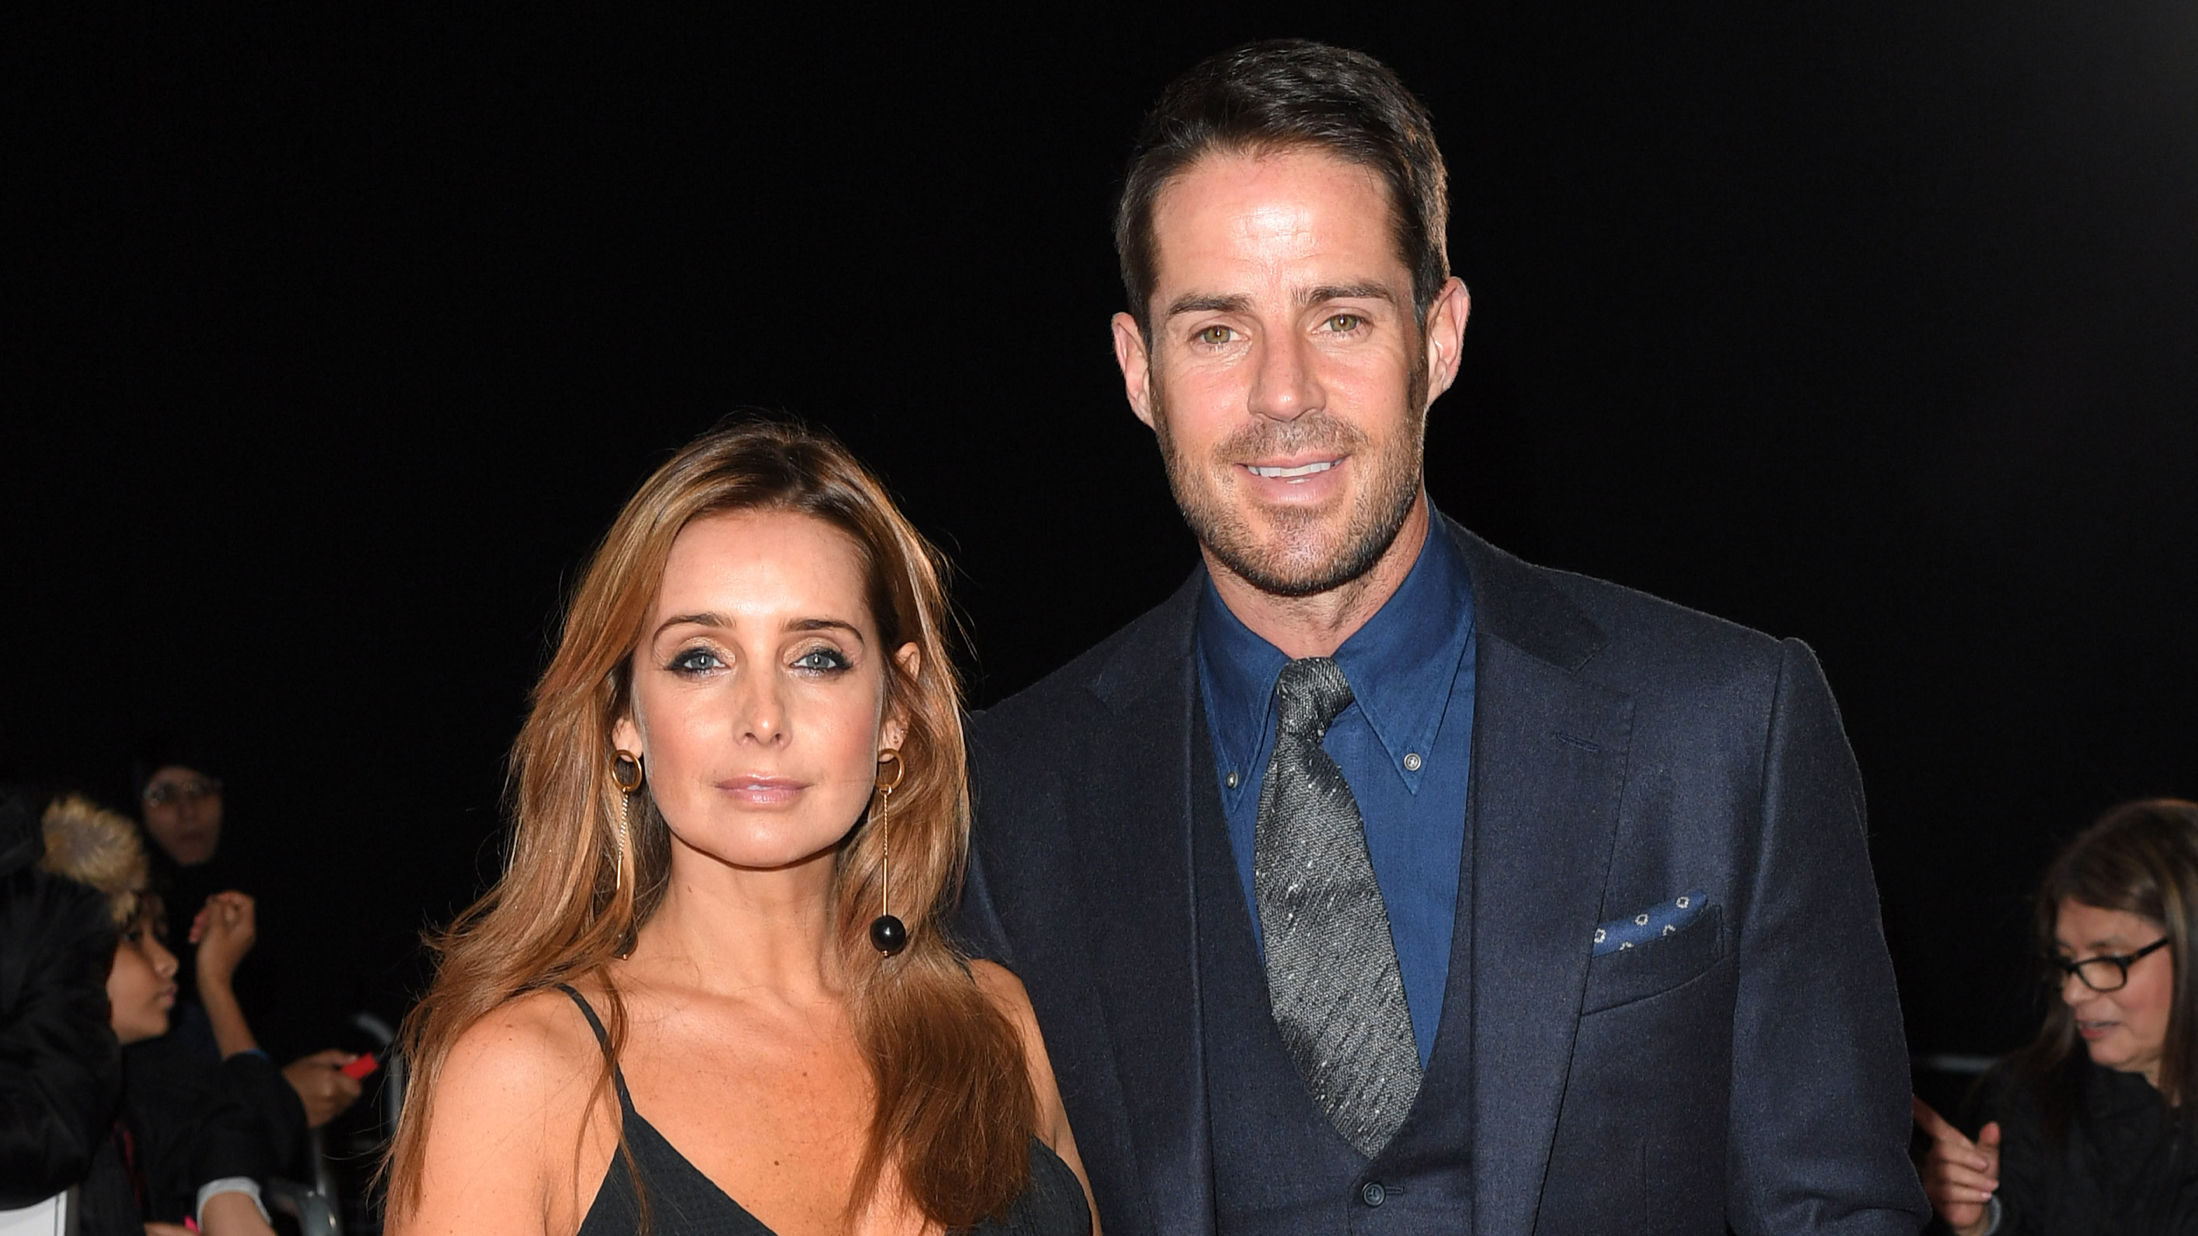 Jamie Redknapp Quote: “I'm enjoying myself this year and for once